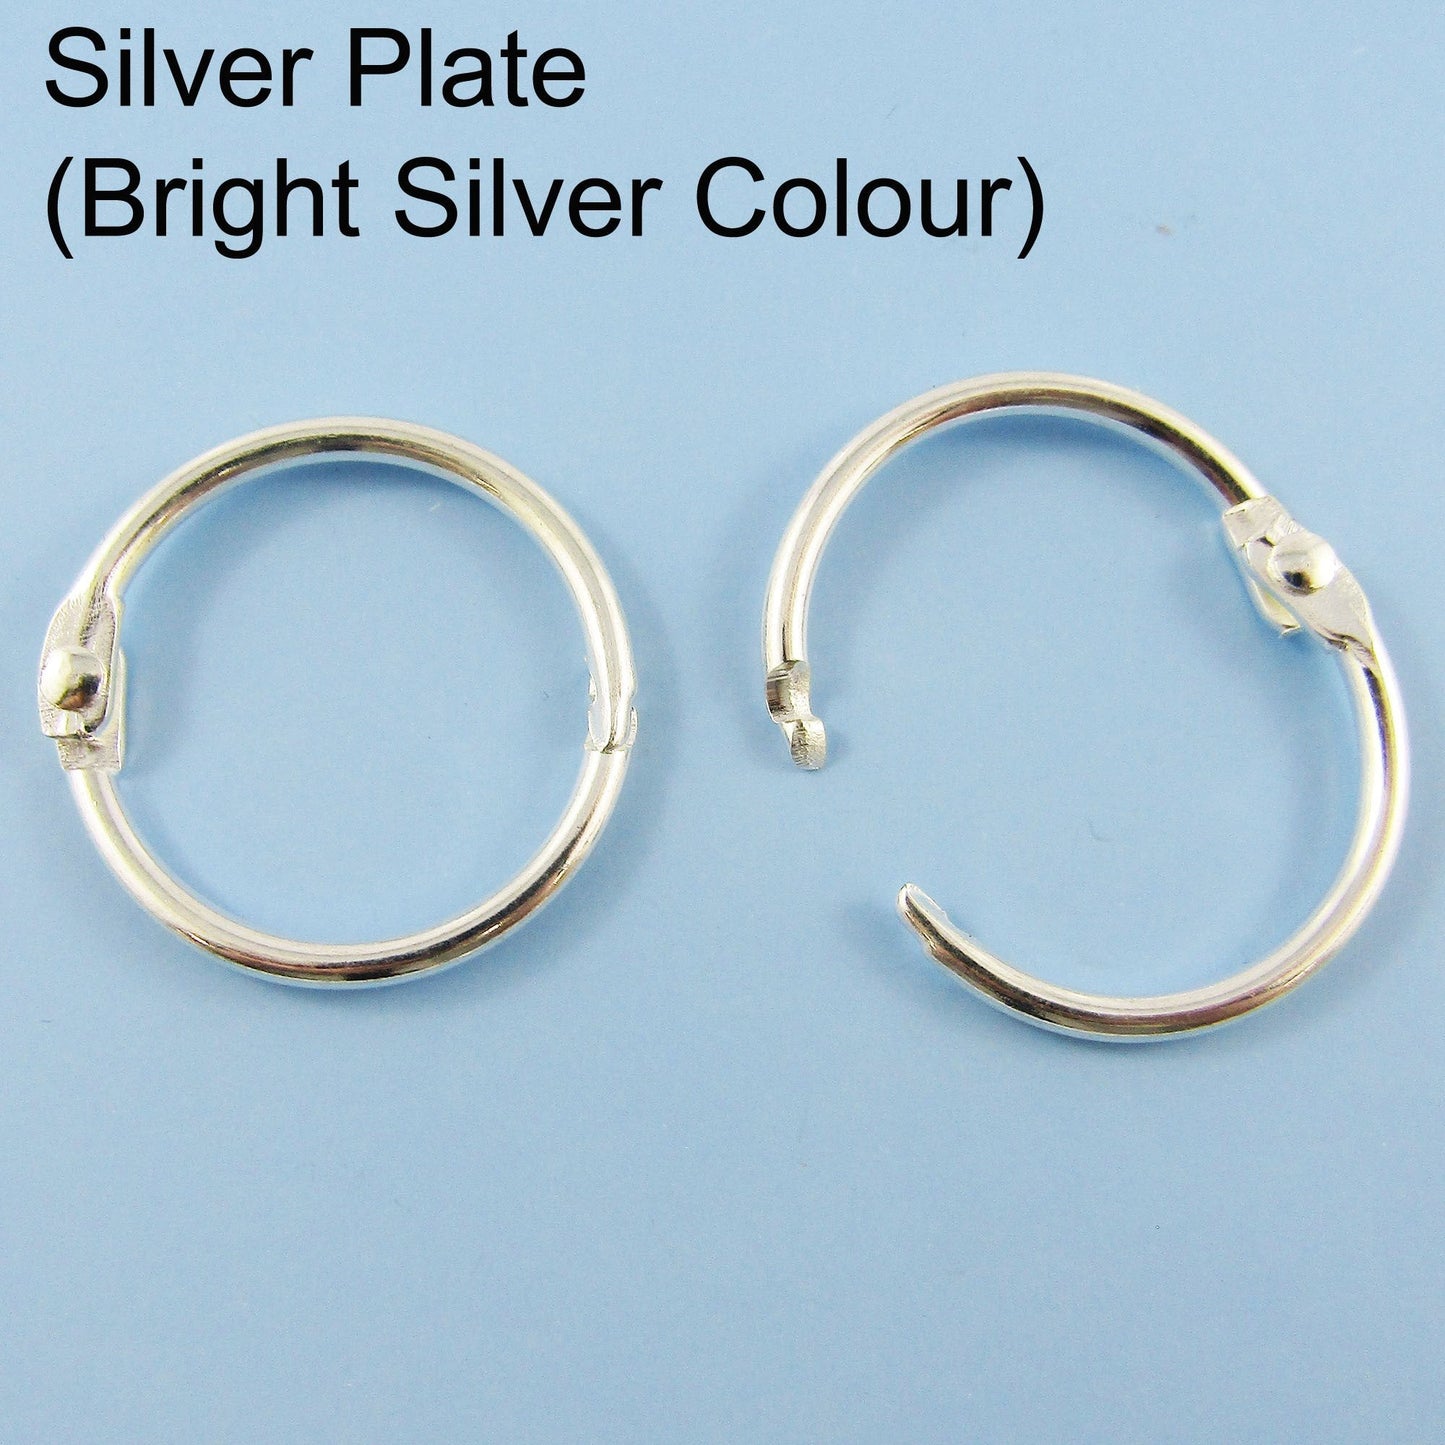 Bulk 10pcs Hinged Ring Iron Silver Plated, 30 x 2mm Keychain and Scrapbooking